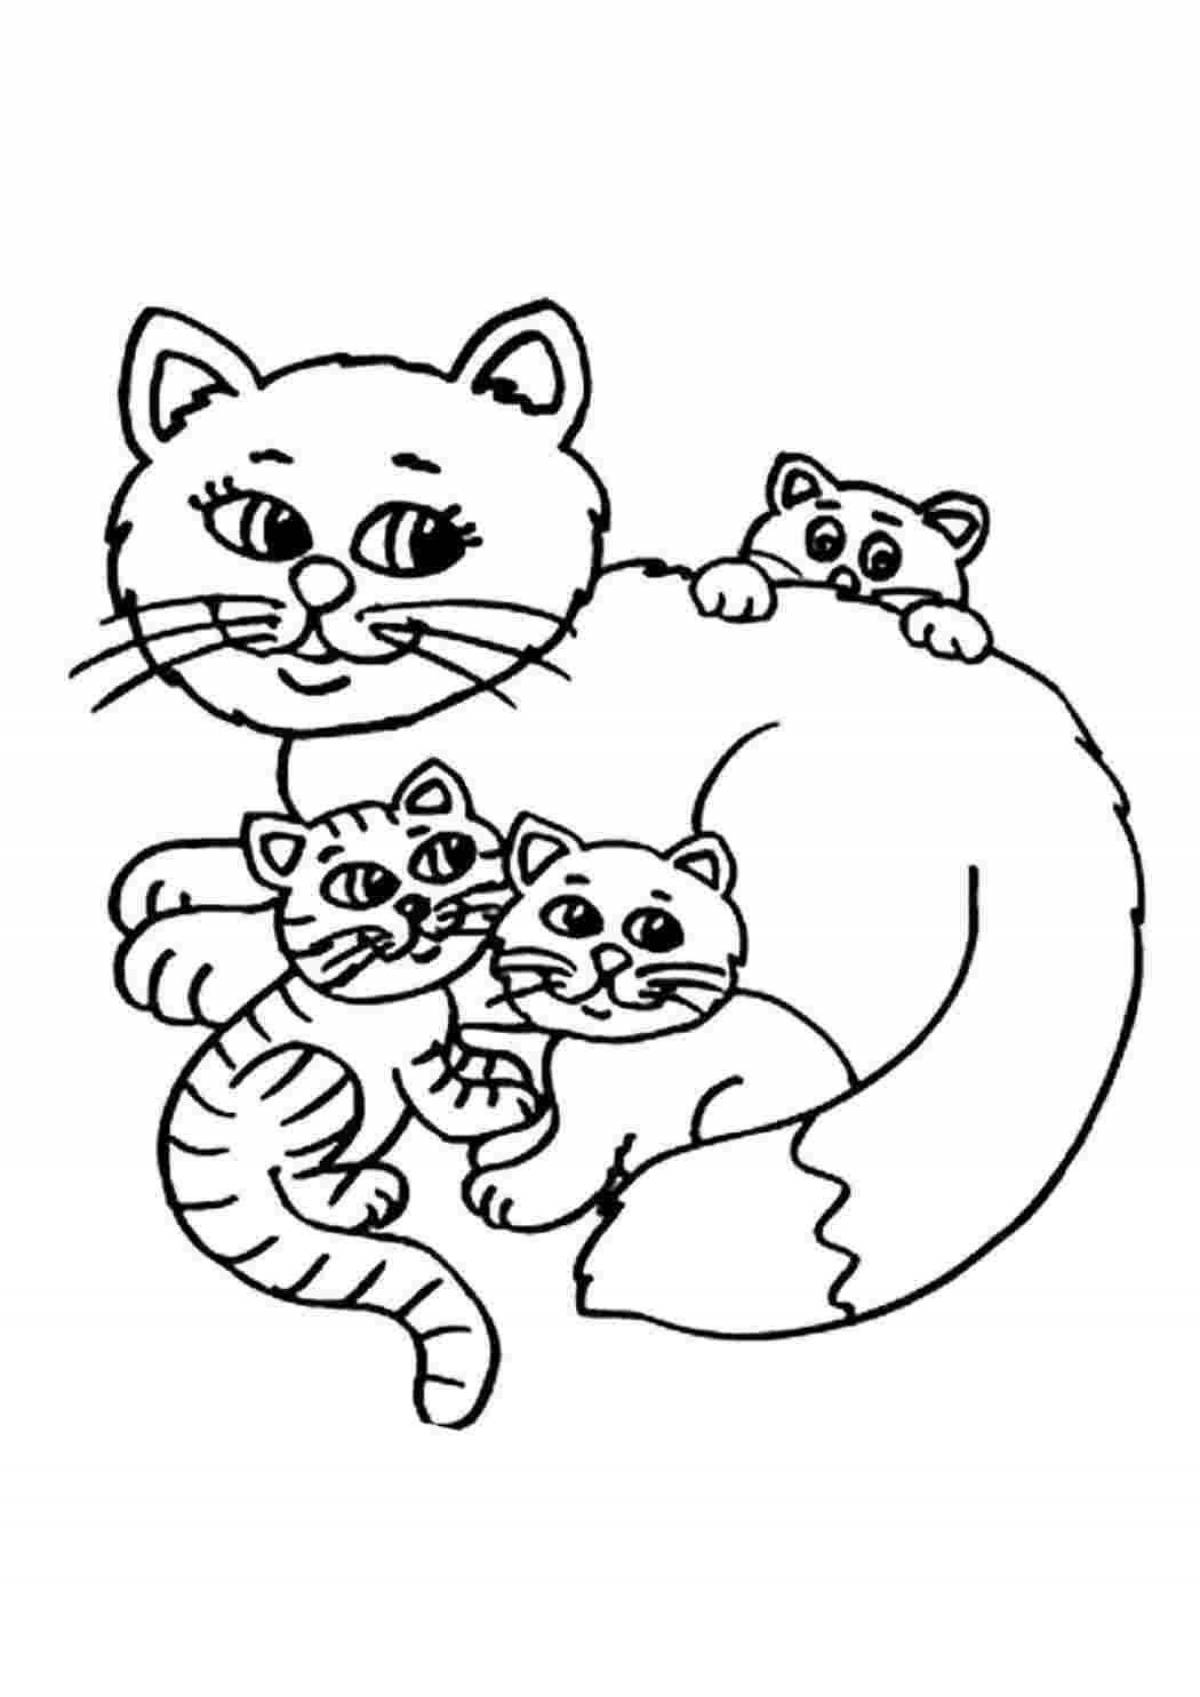 Loving coloring cat with kittens